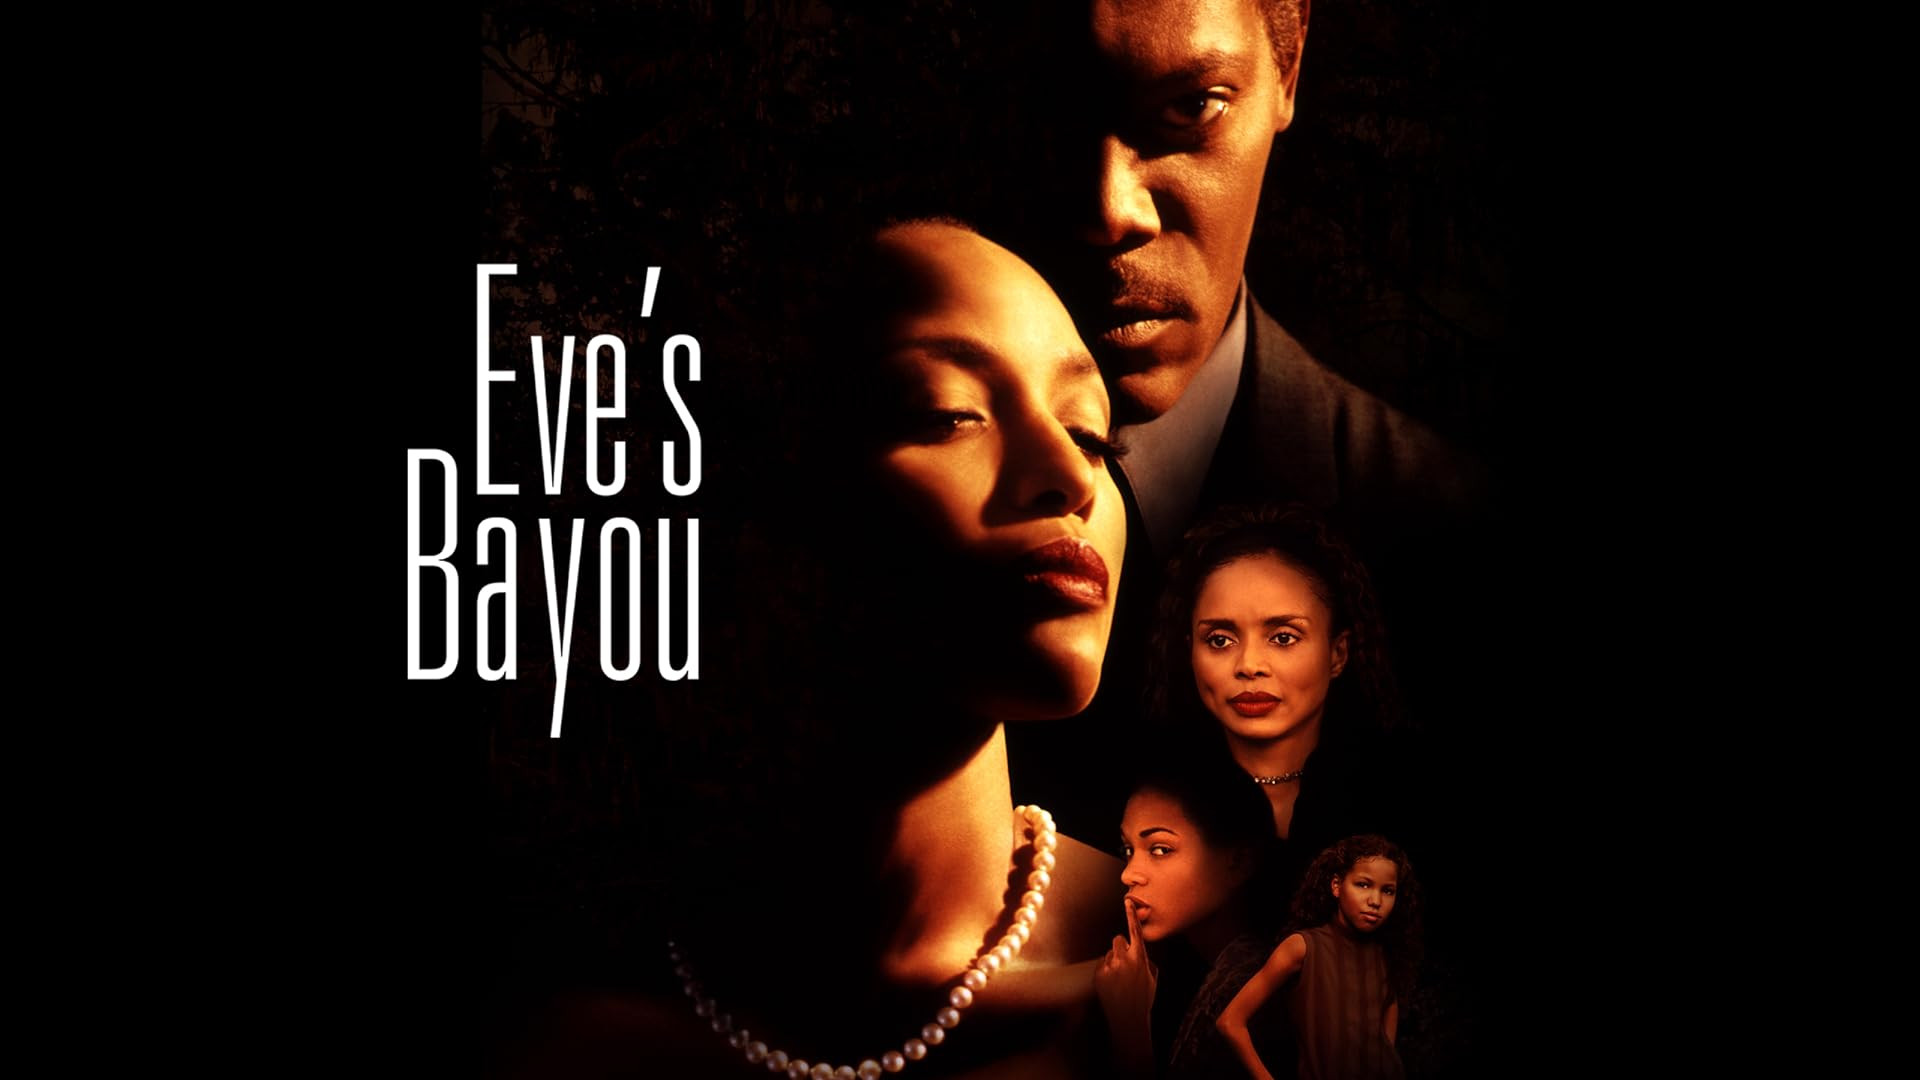 34 Facts about the movie Eve's Bayou - Facts.net